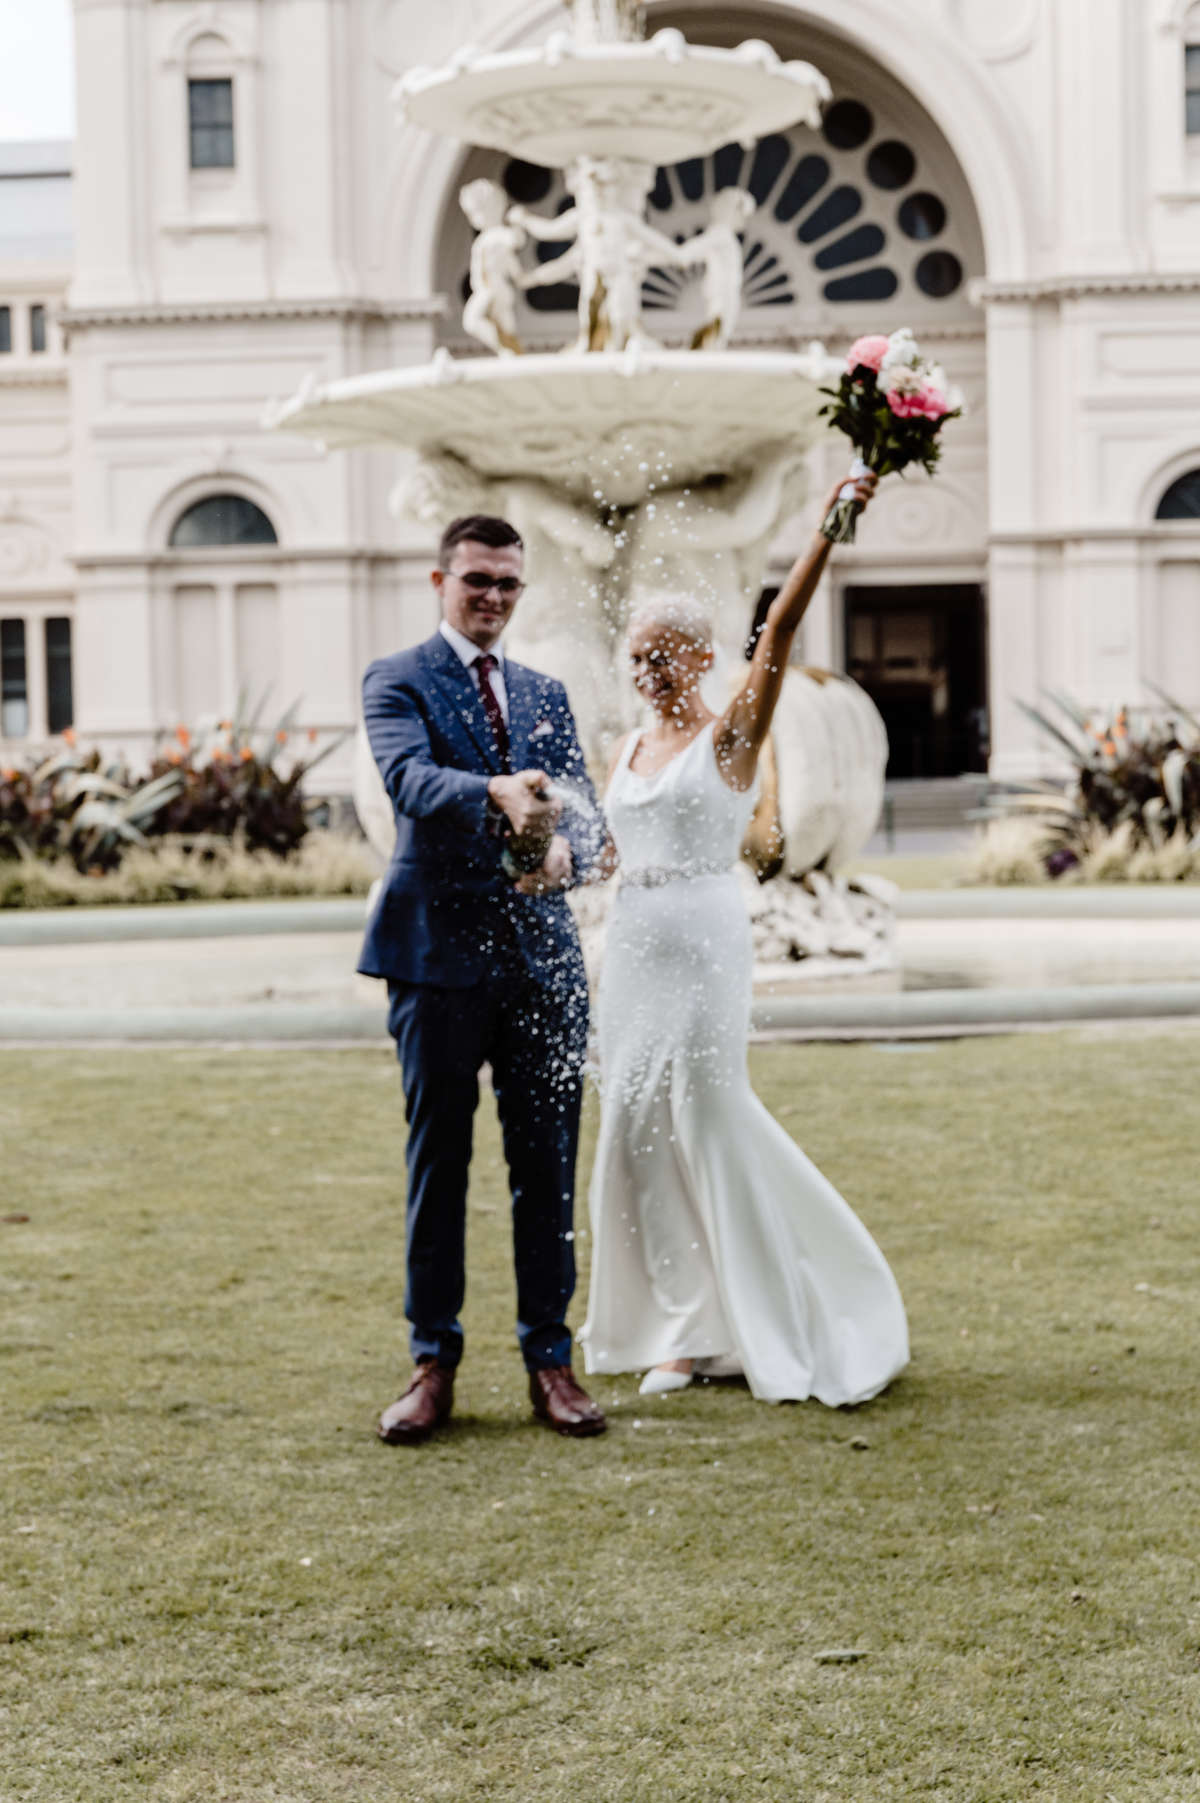 Carlton Gardens wedding ceremony and Harlow Bar reception for Olivia and Parris in Melbourne. Photographed by Bec Conroy Photography.